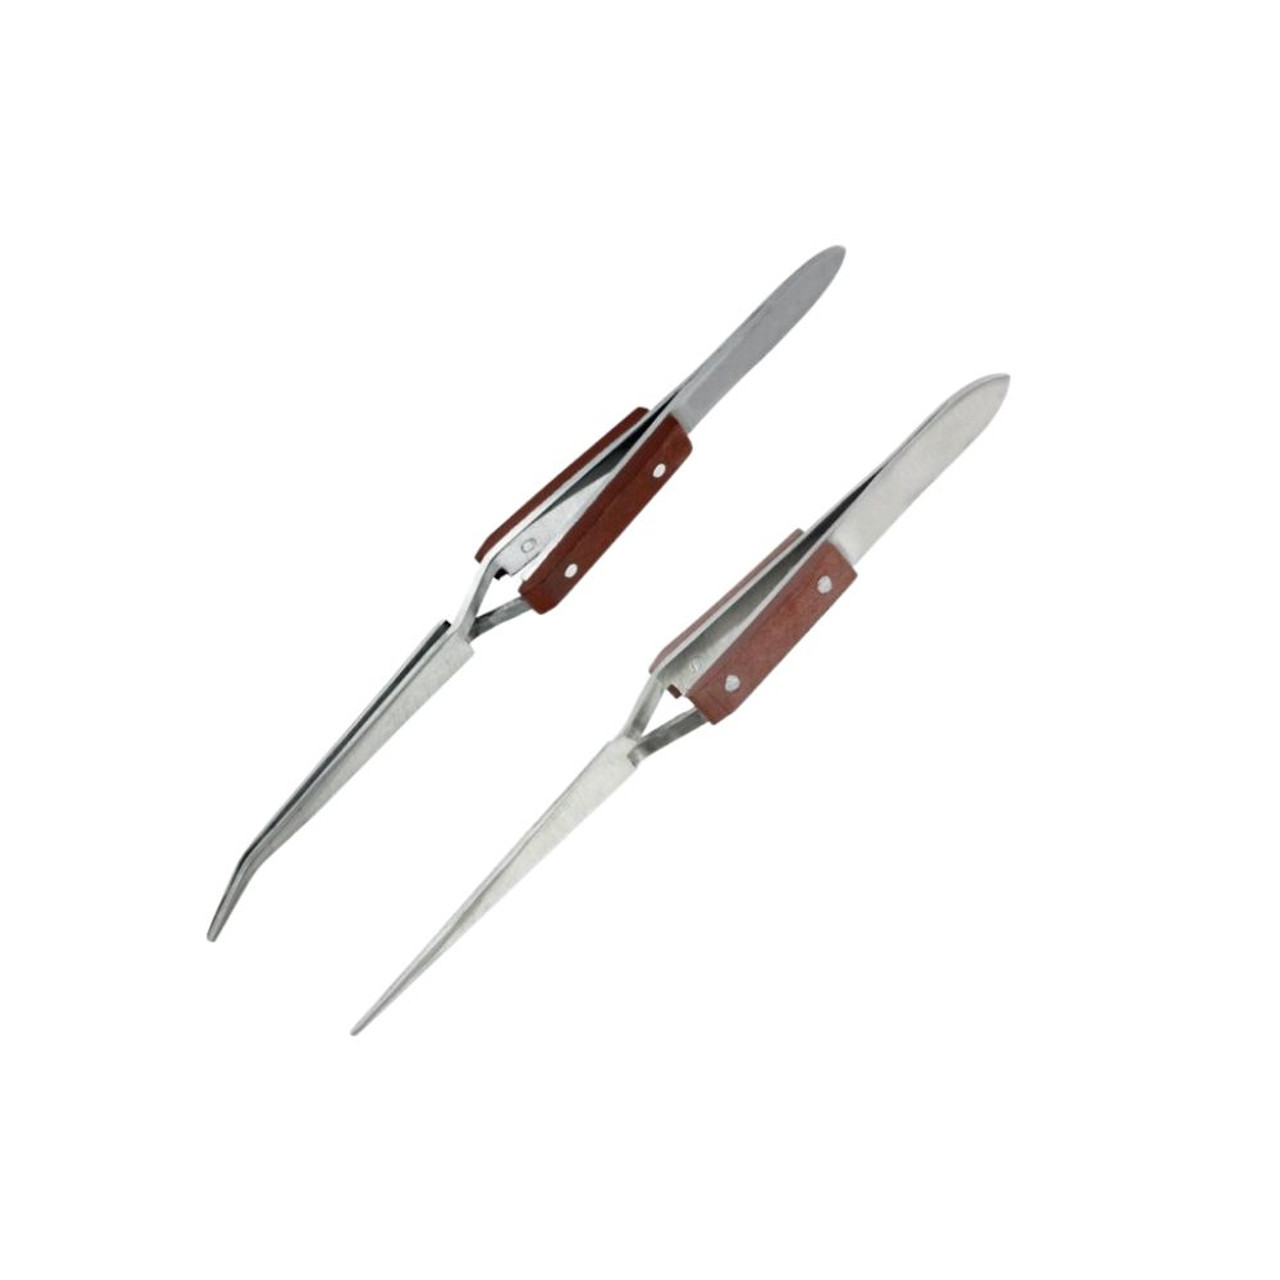 AAProTools Stainless Steel Straight Tweezers with Reverse Wooden Handle Tweezers Bent and Straight Reverse Action for Electronics Jewelry-Making